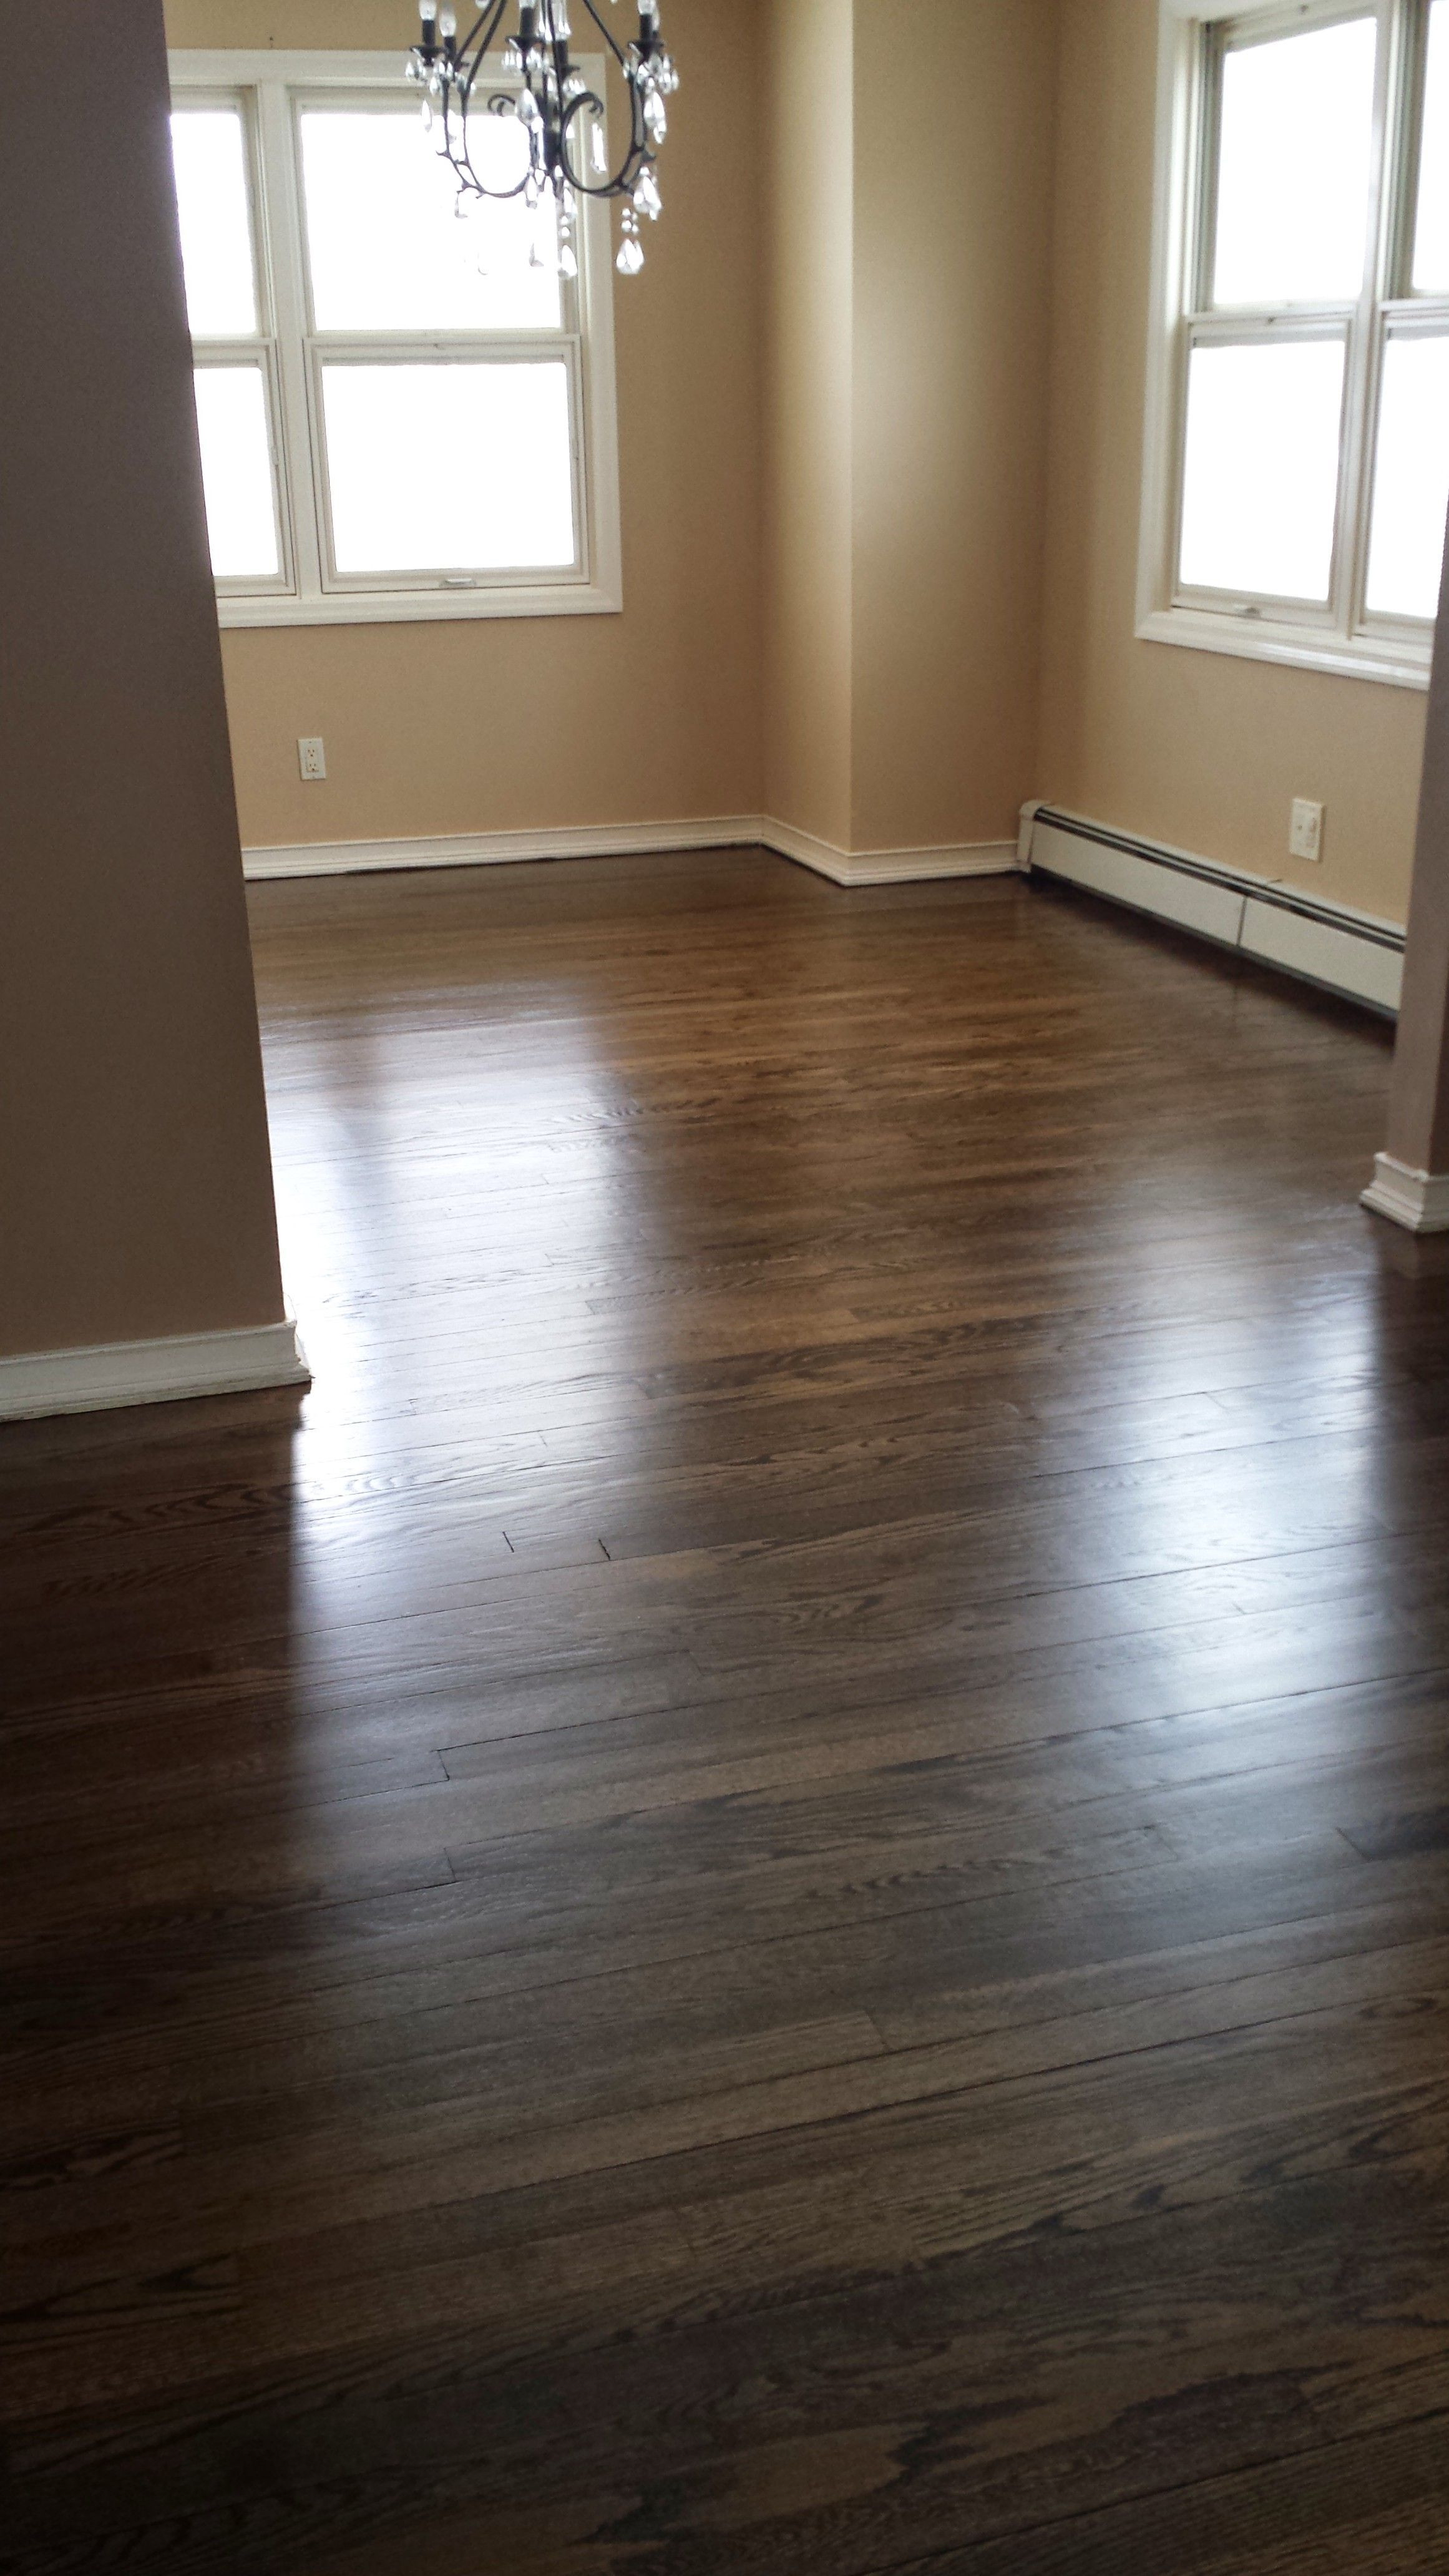 12 Fabulous Cheapest Hardwood Flooring Options 2024 free download cheapest hardwood flooring options of hardwood floor refinishing is an affordable way to spruce up your within hardwood floor refinishing is an affordable way to spruce up your space without